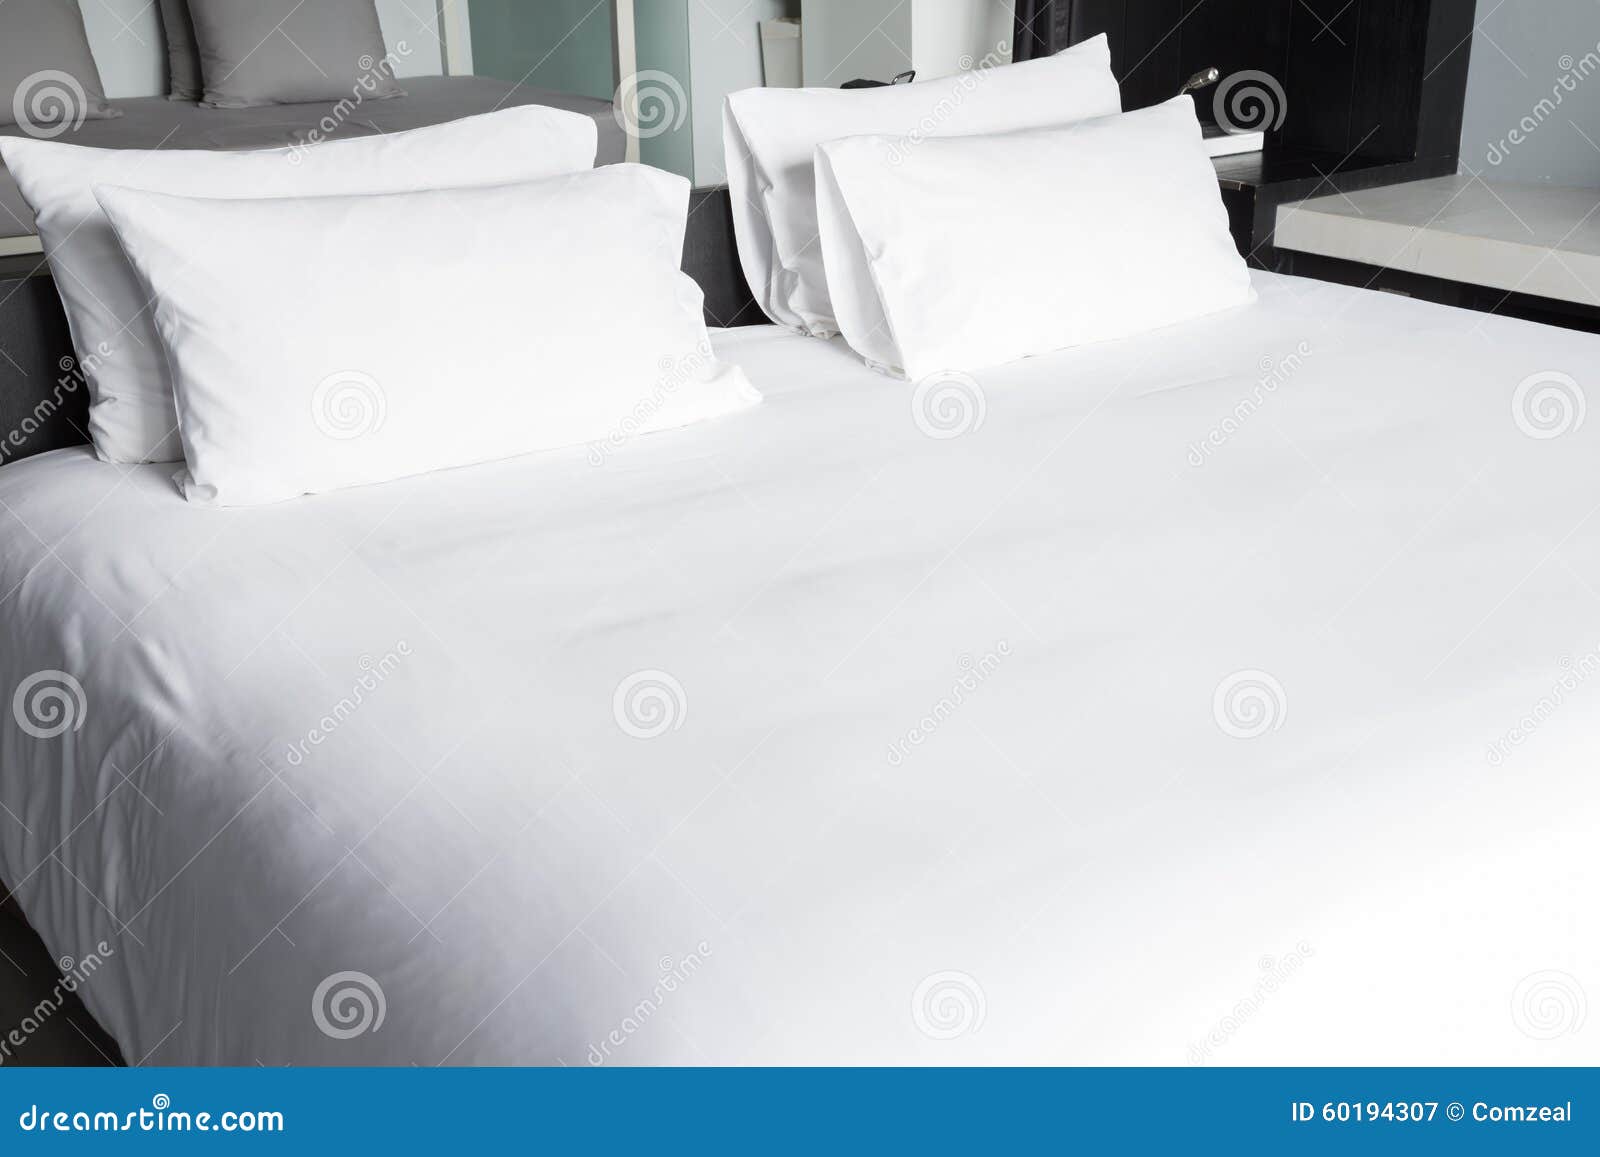 white bed sheets and pillows